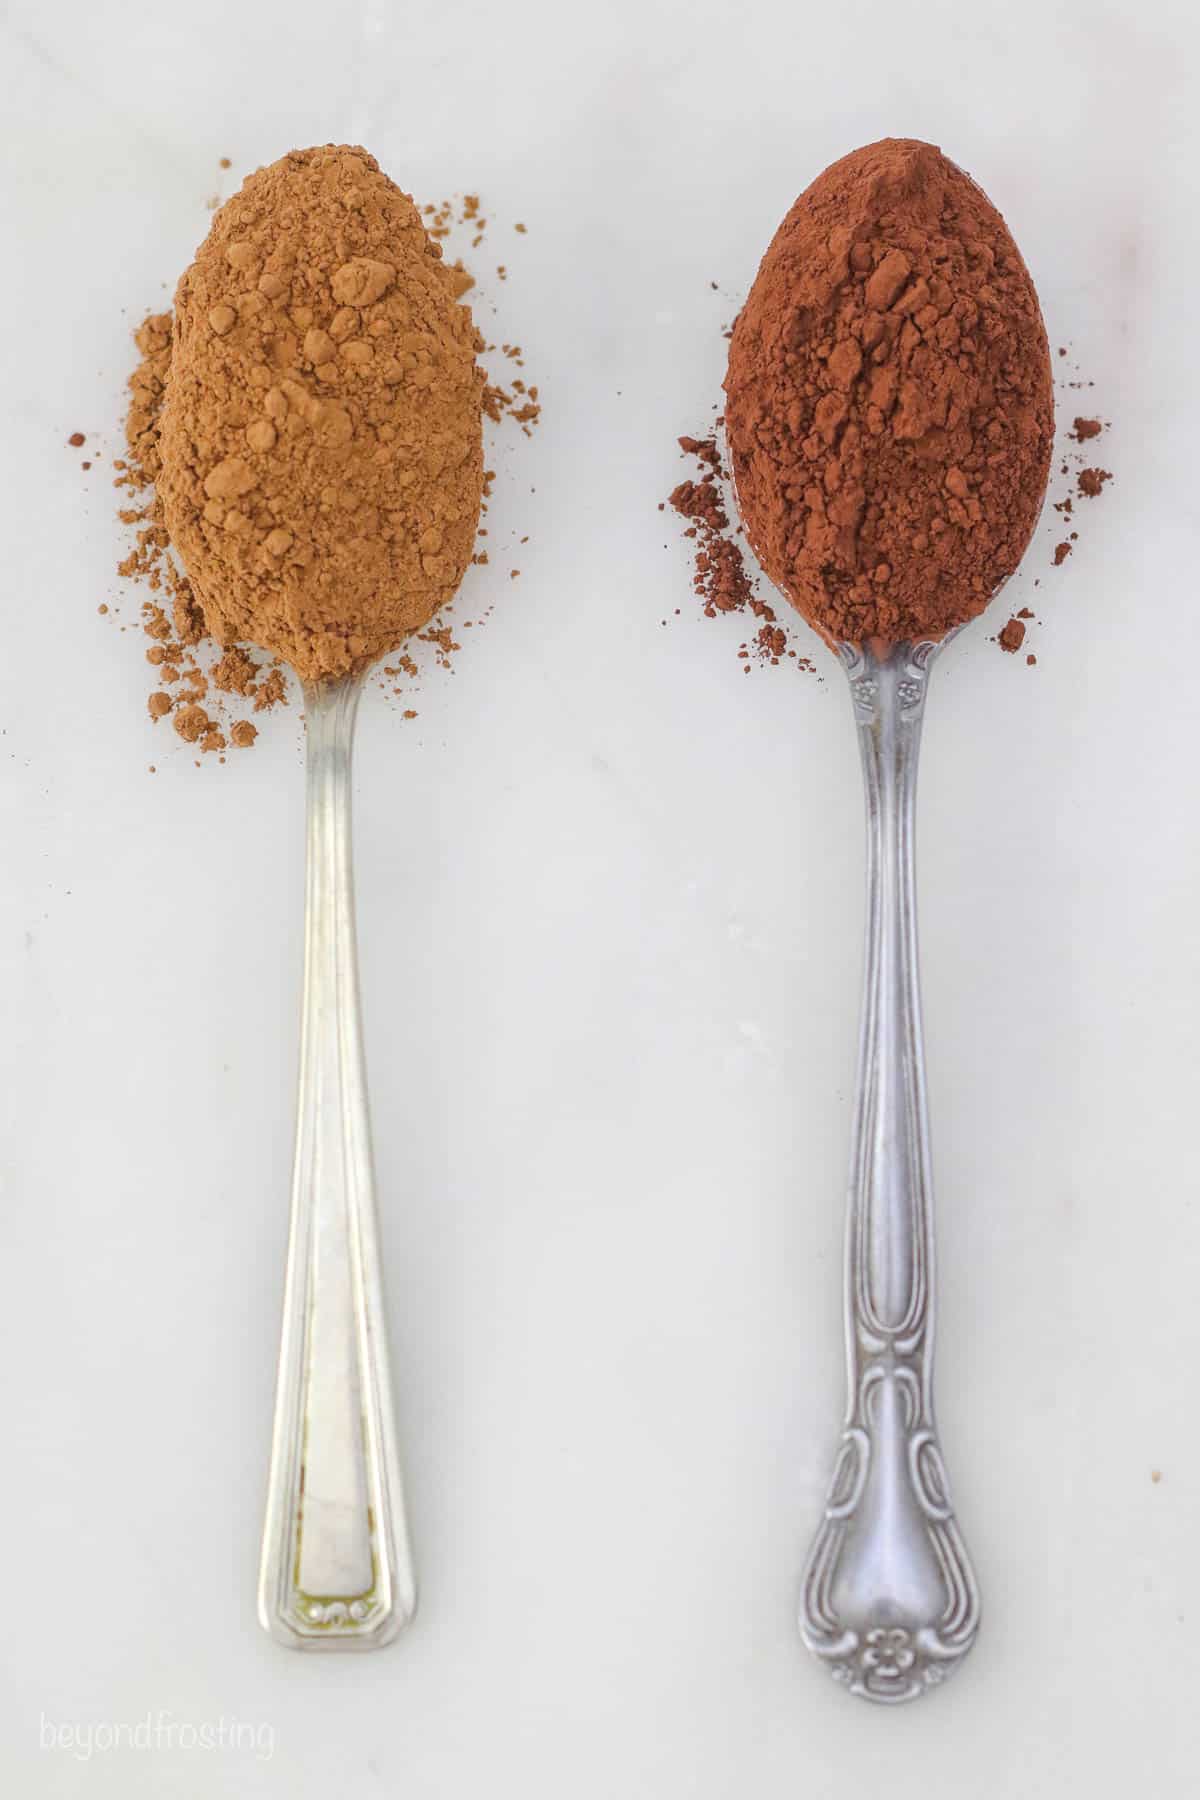 two spoons on a table with cocoa powder